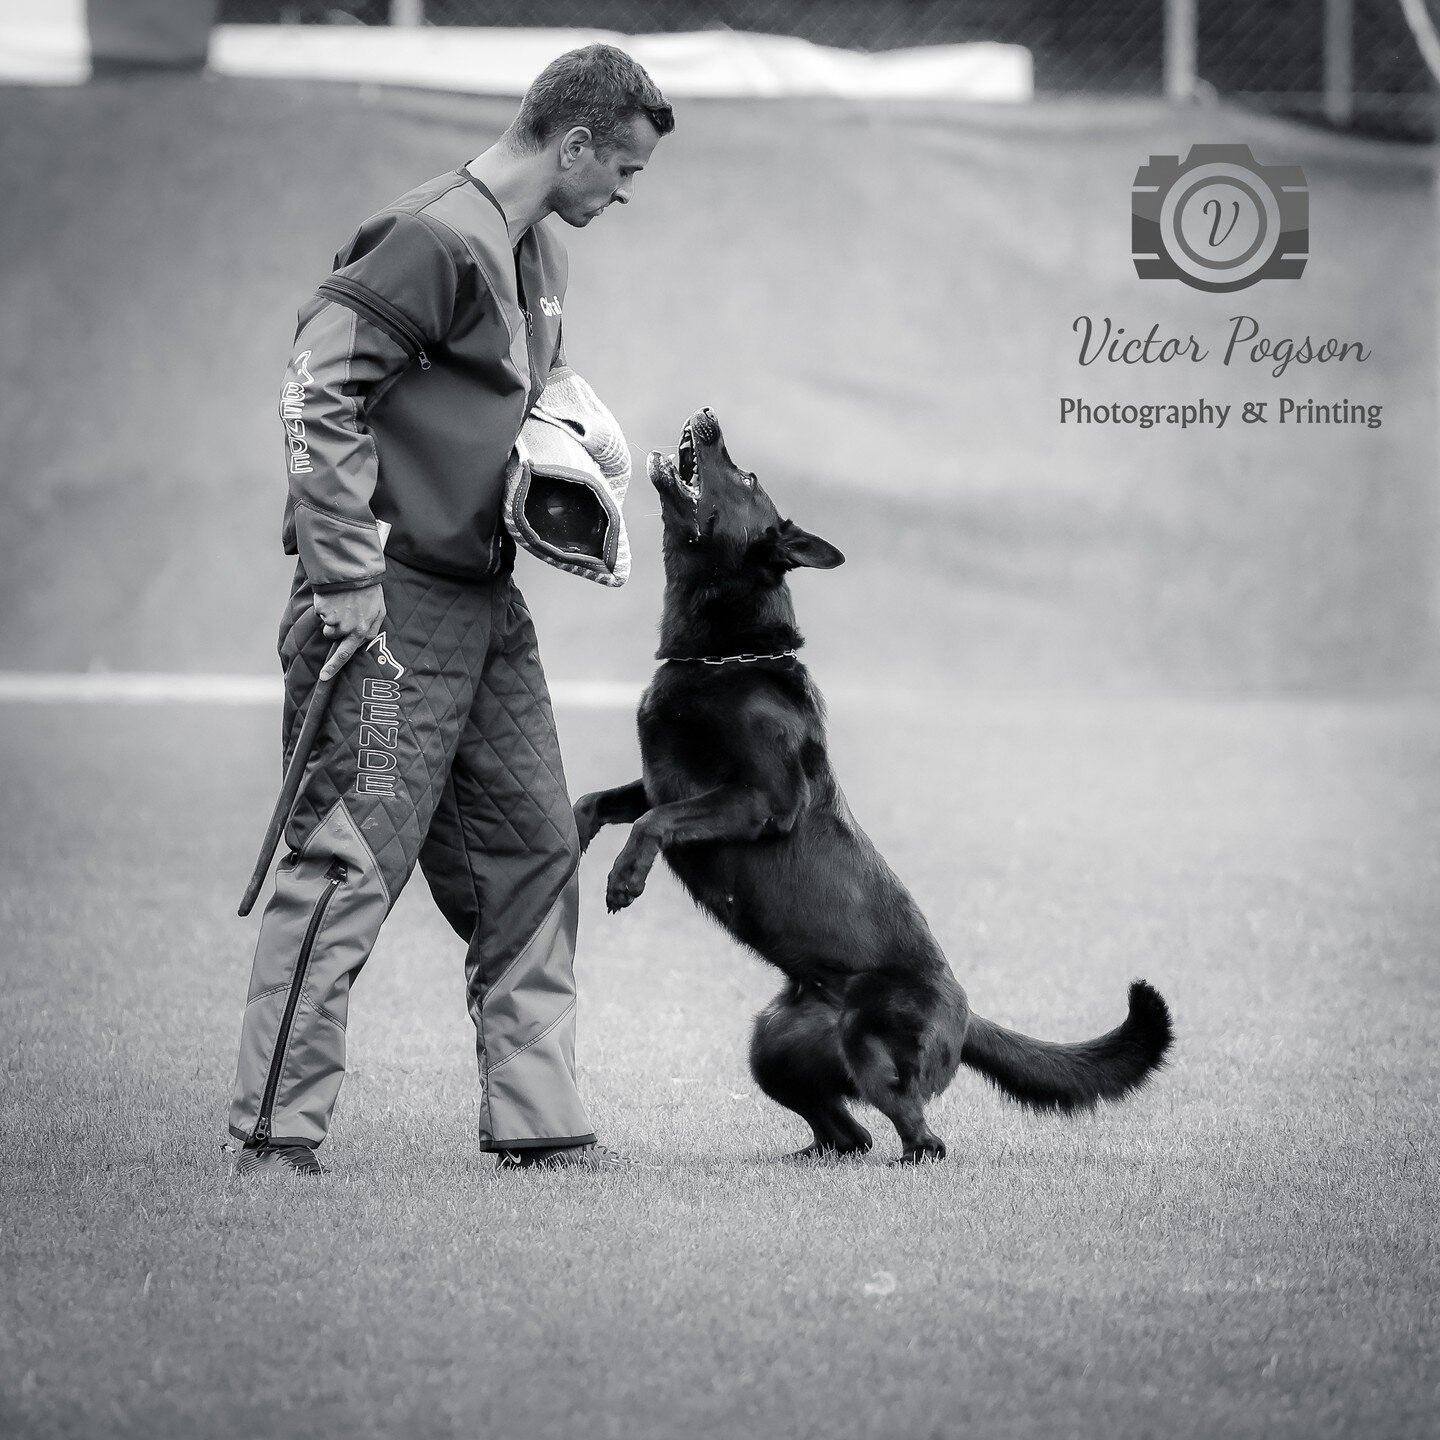 One of my favourites from the recent WUSV World Championship Universal. Photos of most competitors are now available at https://victorpogson.picfair.com 

#wusv #universal #championship #gsd #germanshepherd #schaefferhund #sursee #weltmeisterschaft #